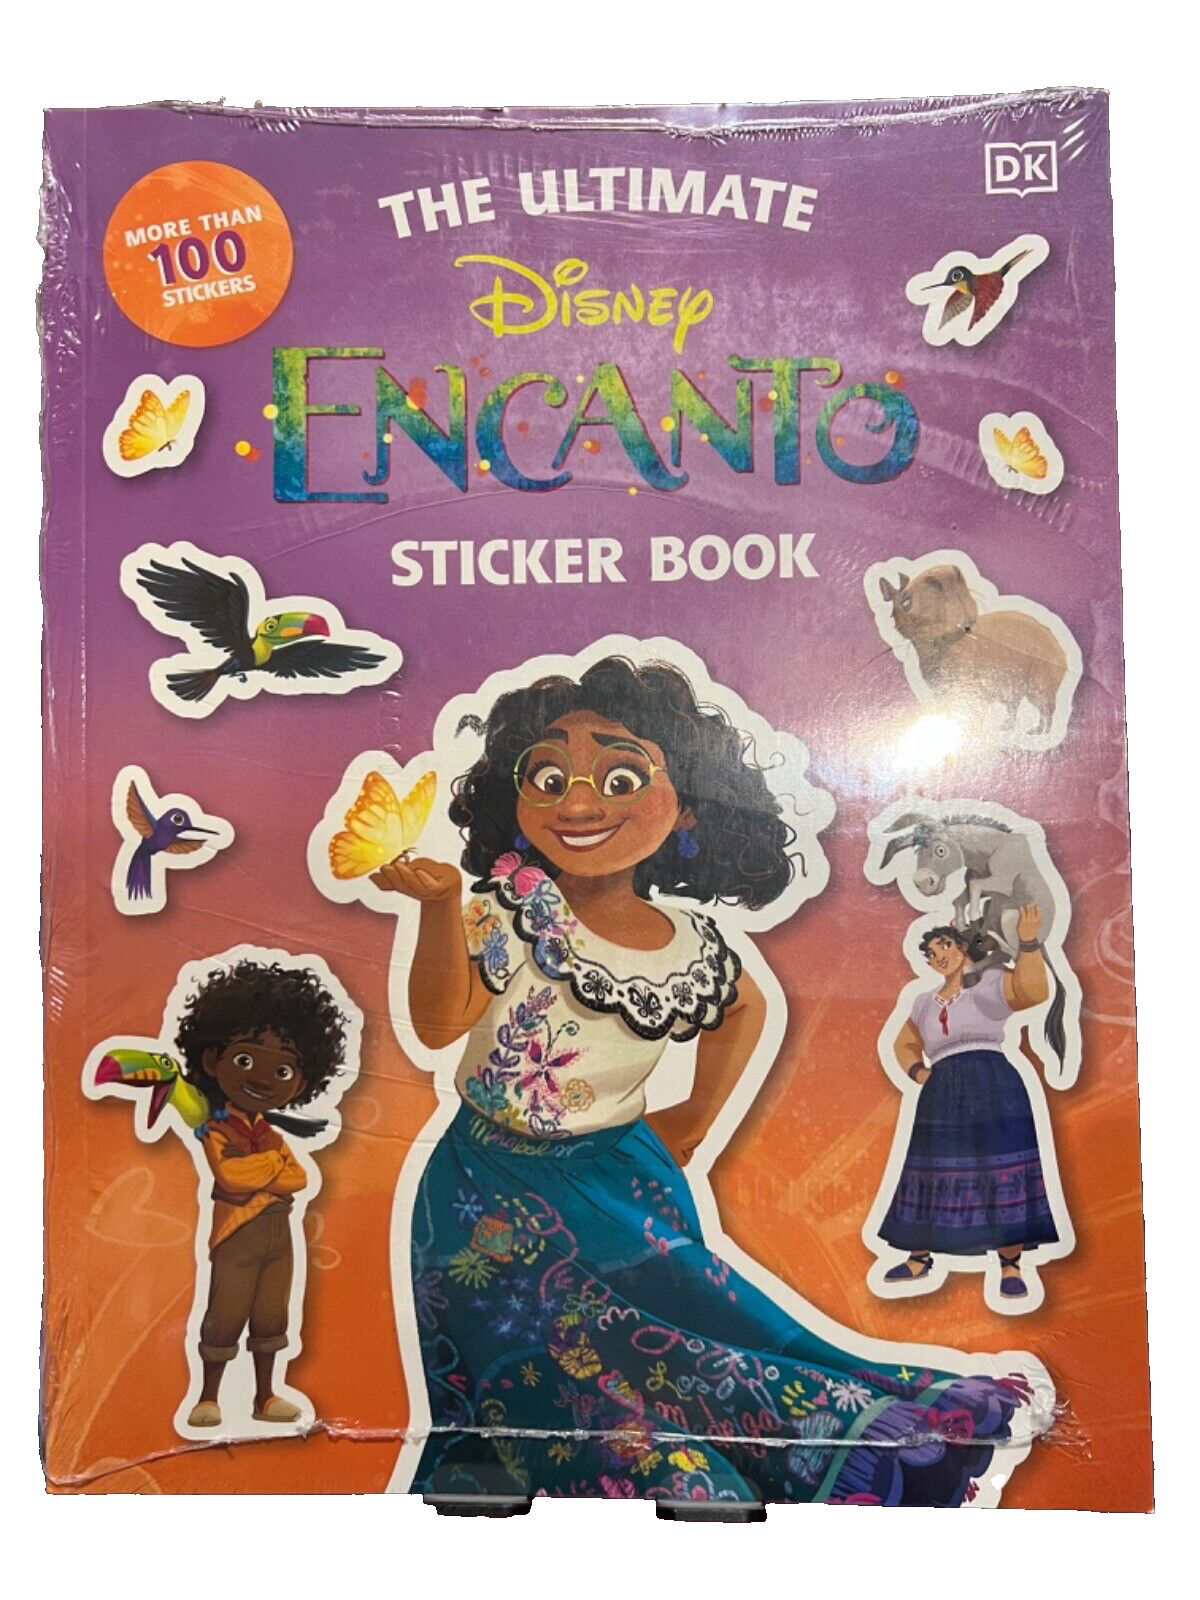 The Ultimate Disney Encanto Sticker Book 100+ Stickers New and Sealed